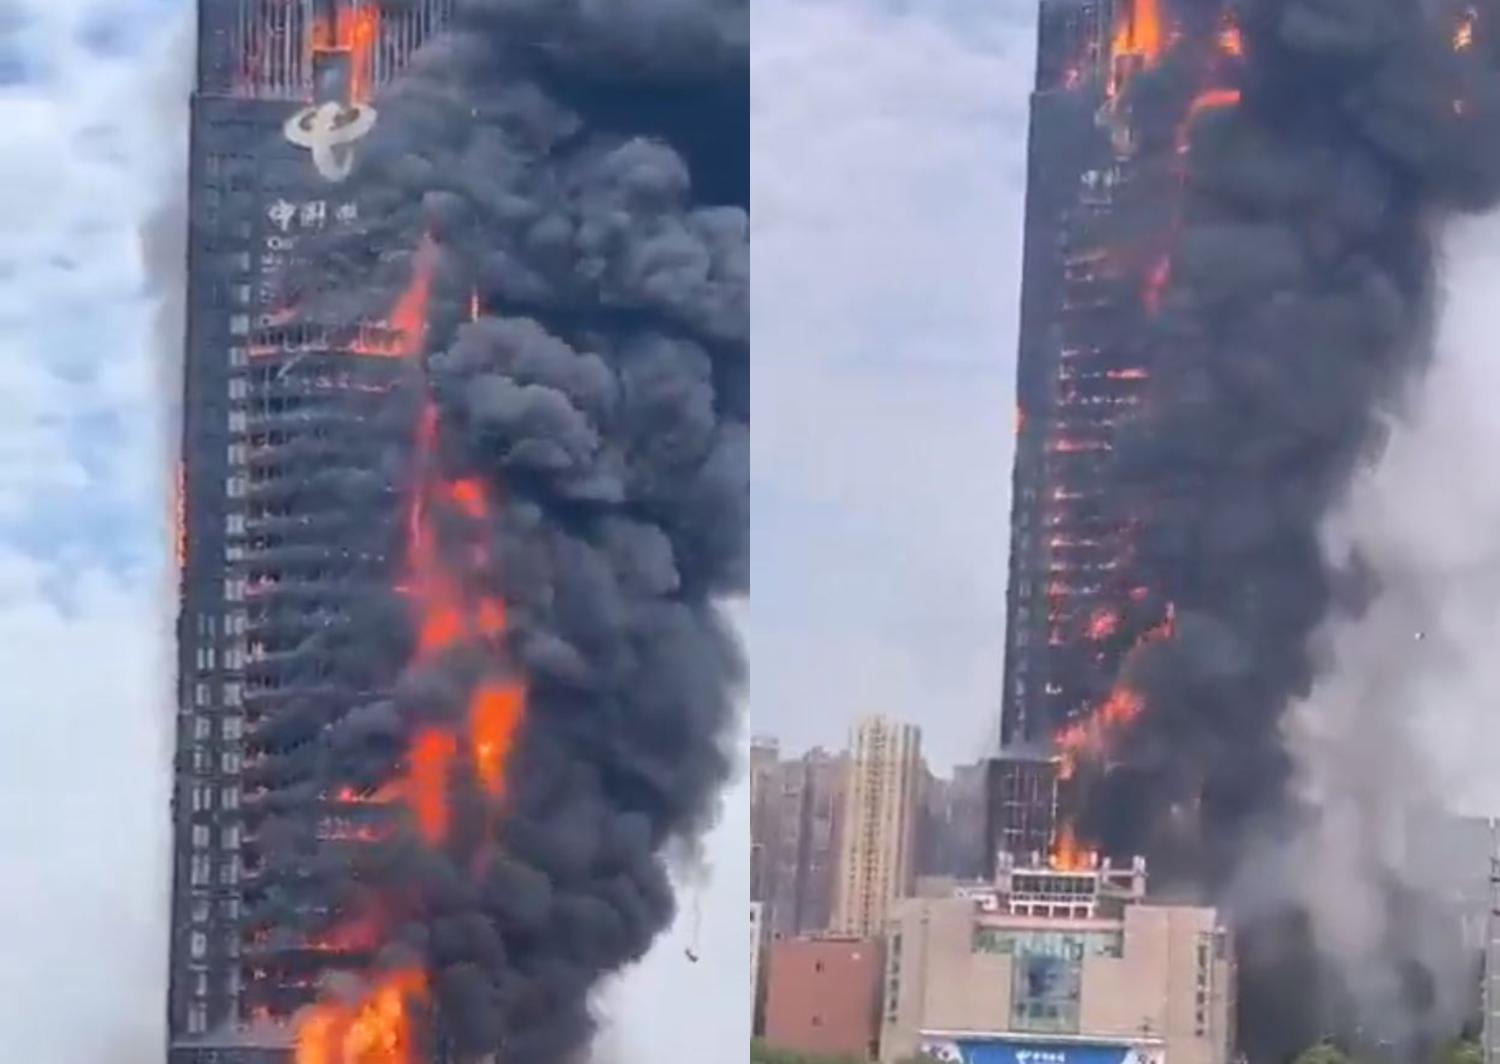 The blaze consumed a tall building that housed an office of state-owned telecommunications company China Telecom. 